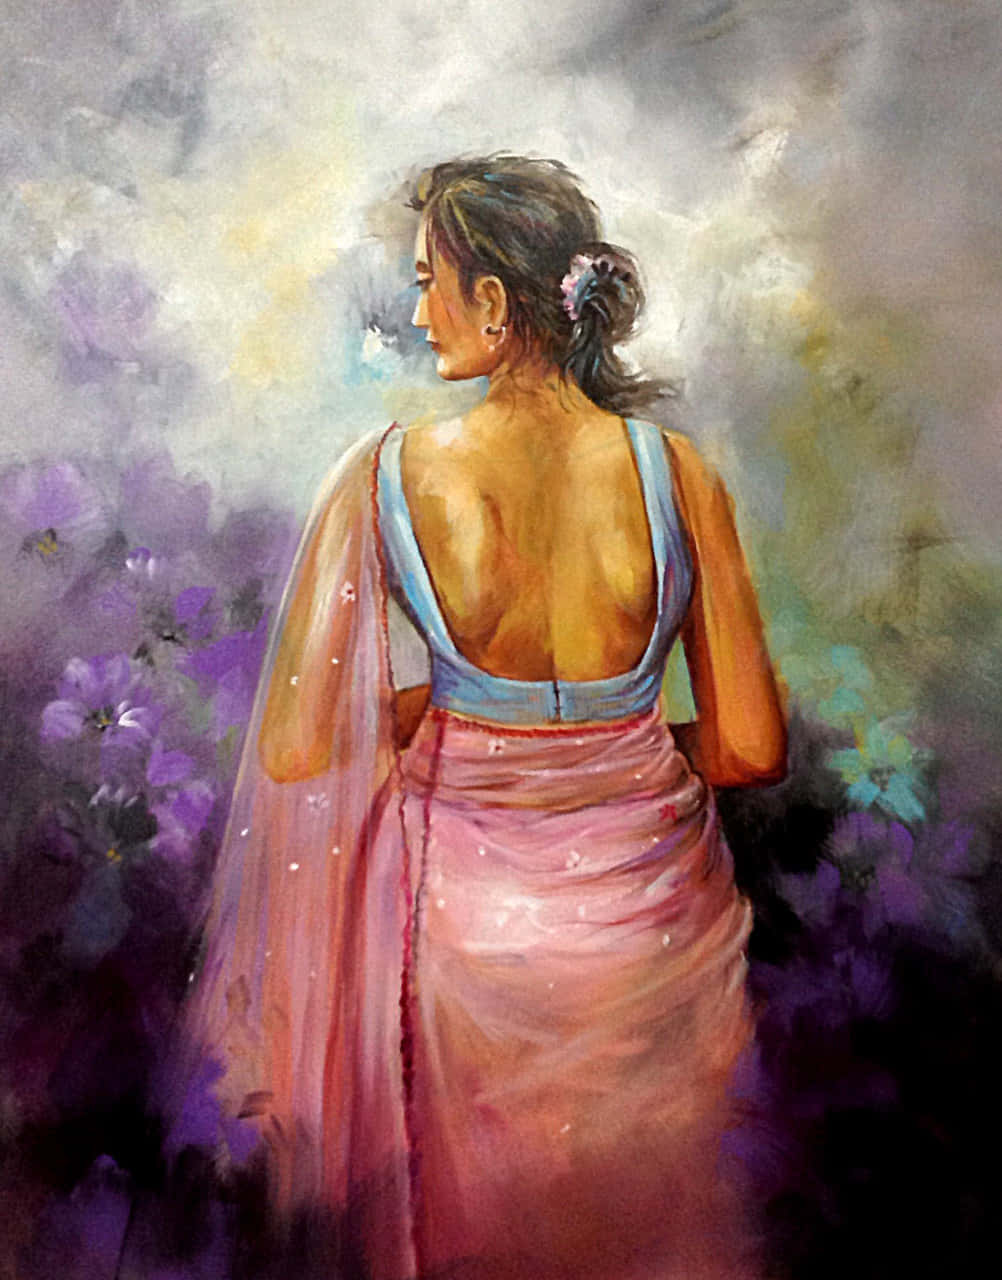 A Painting Of A Woman In A Pink Sari